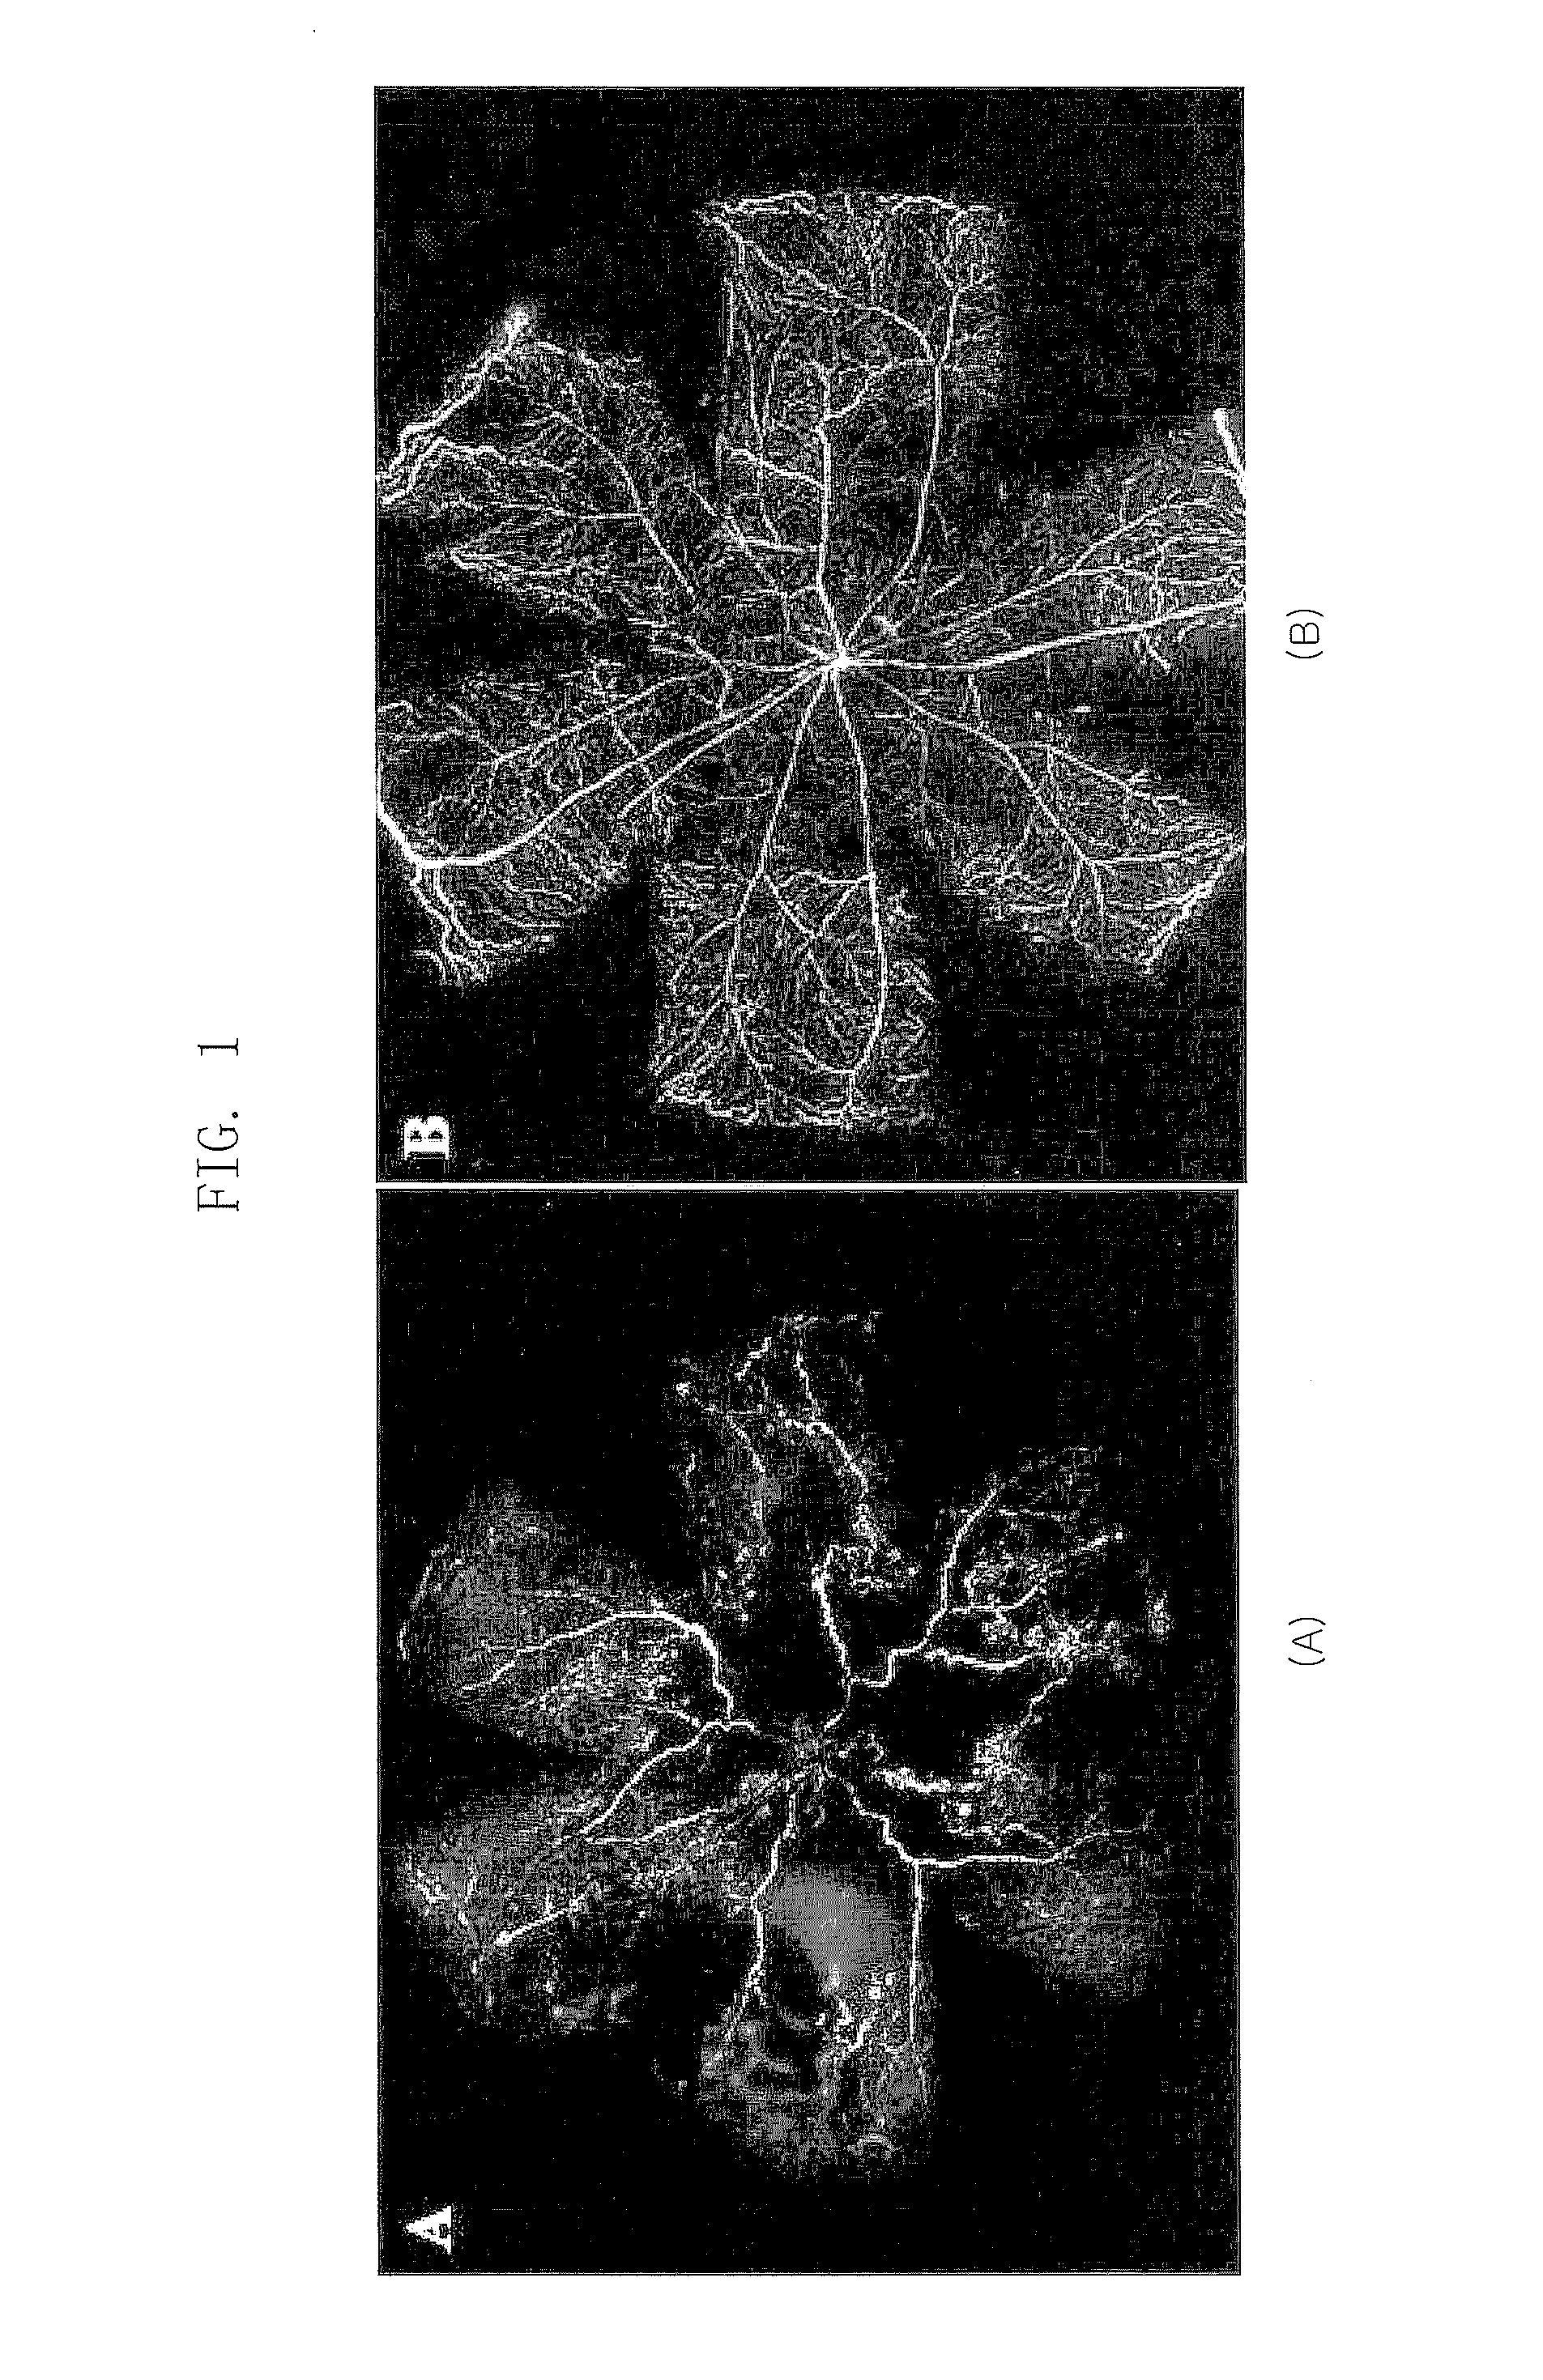 Composition for Treating Retinopathy or Glaucoma Comprising Thrombin Derived Peptides